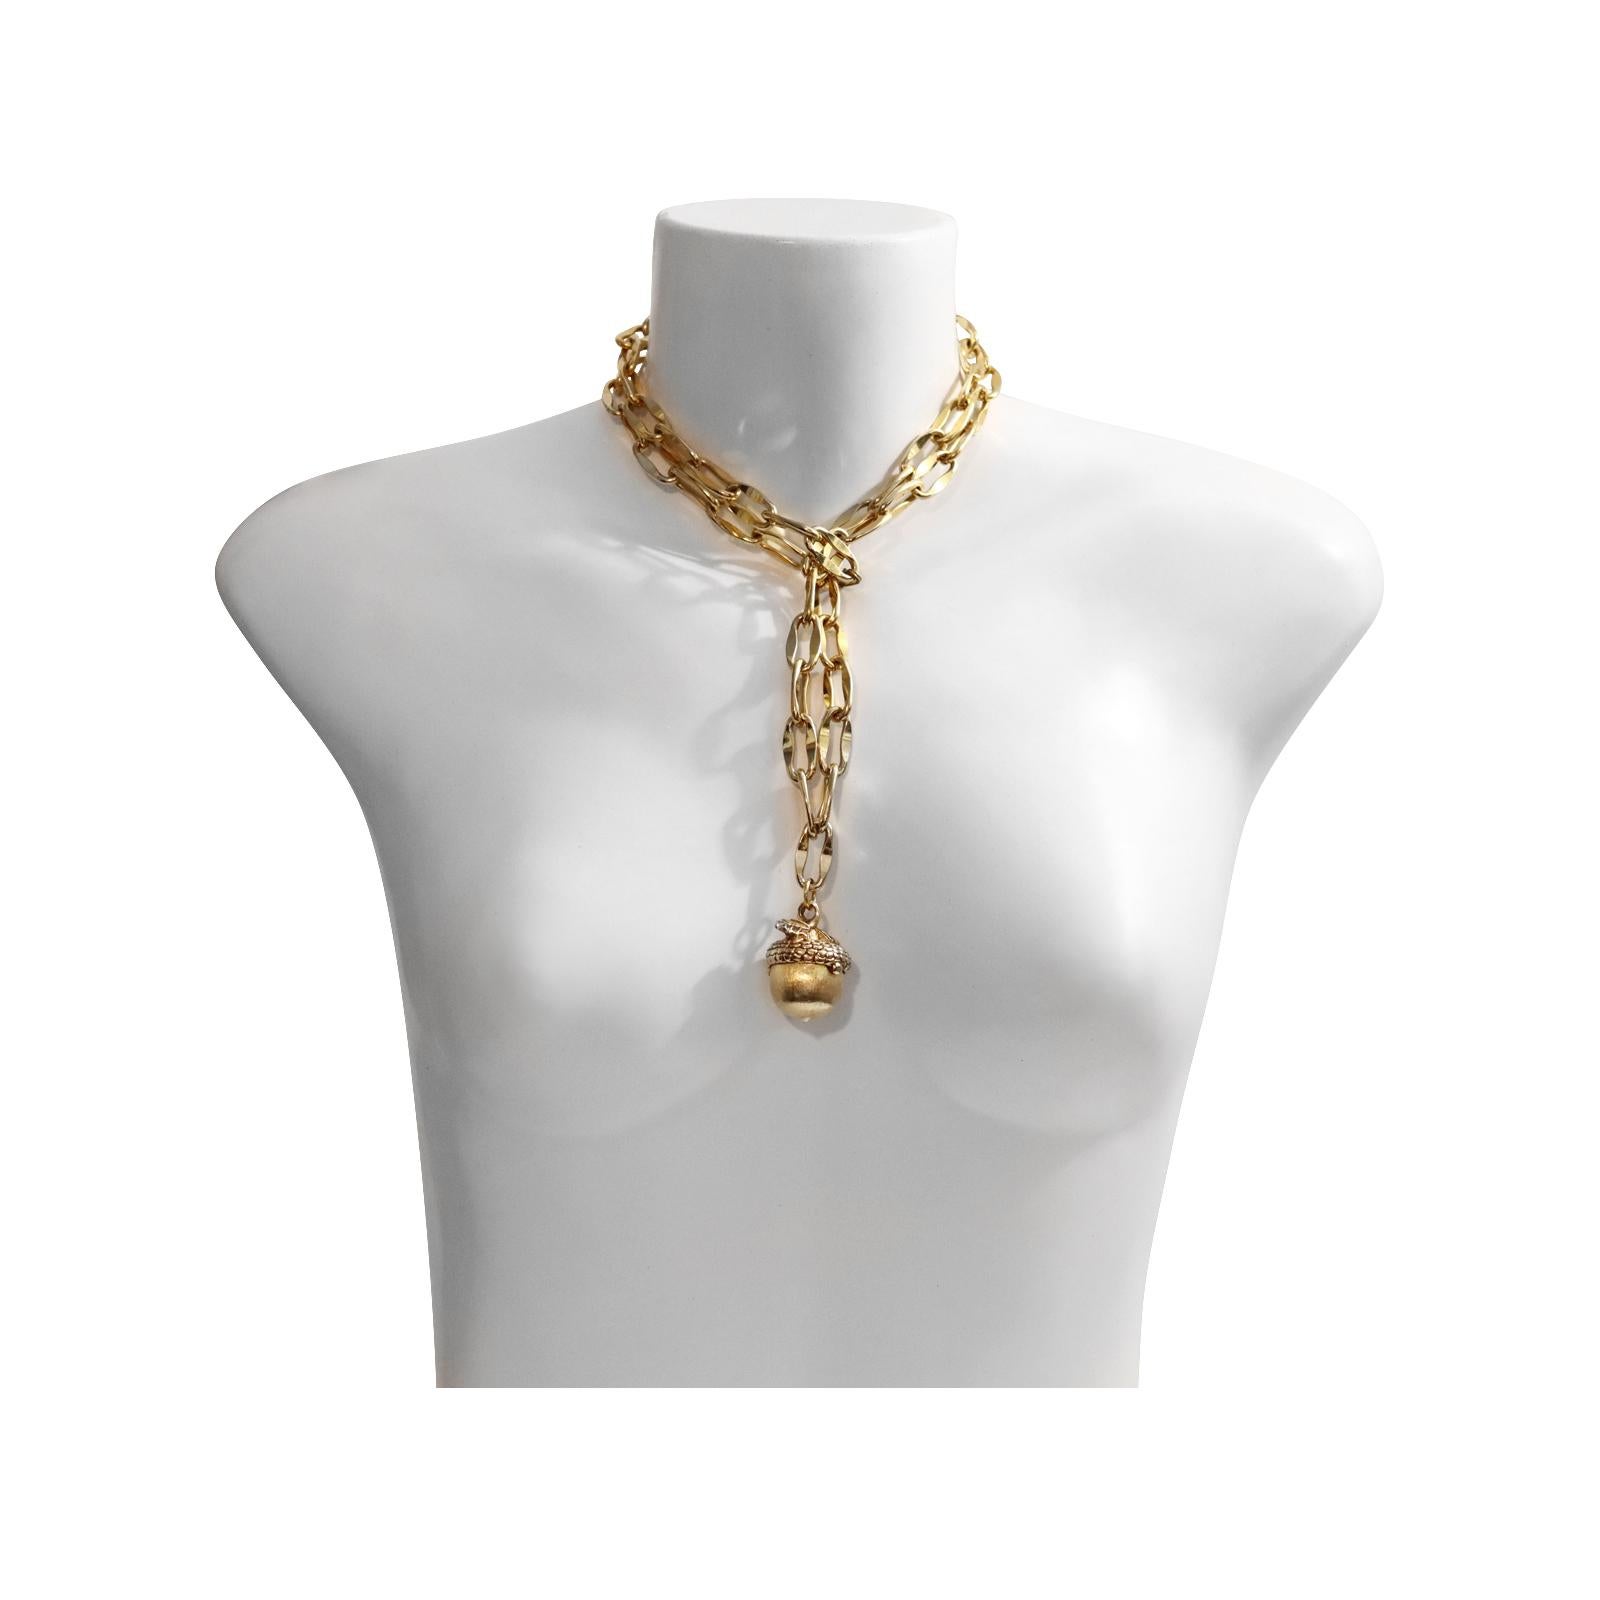 Vintage Gold Tone Long Link Chain with Dangling Opening Fob Circa 1980's For Sale 2